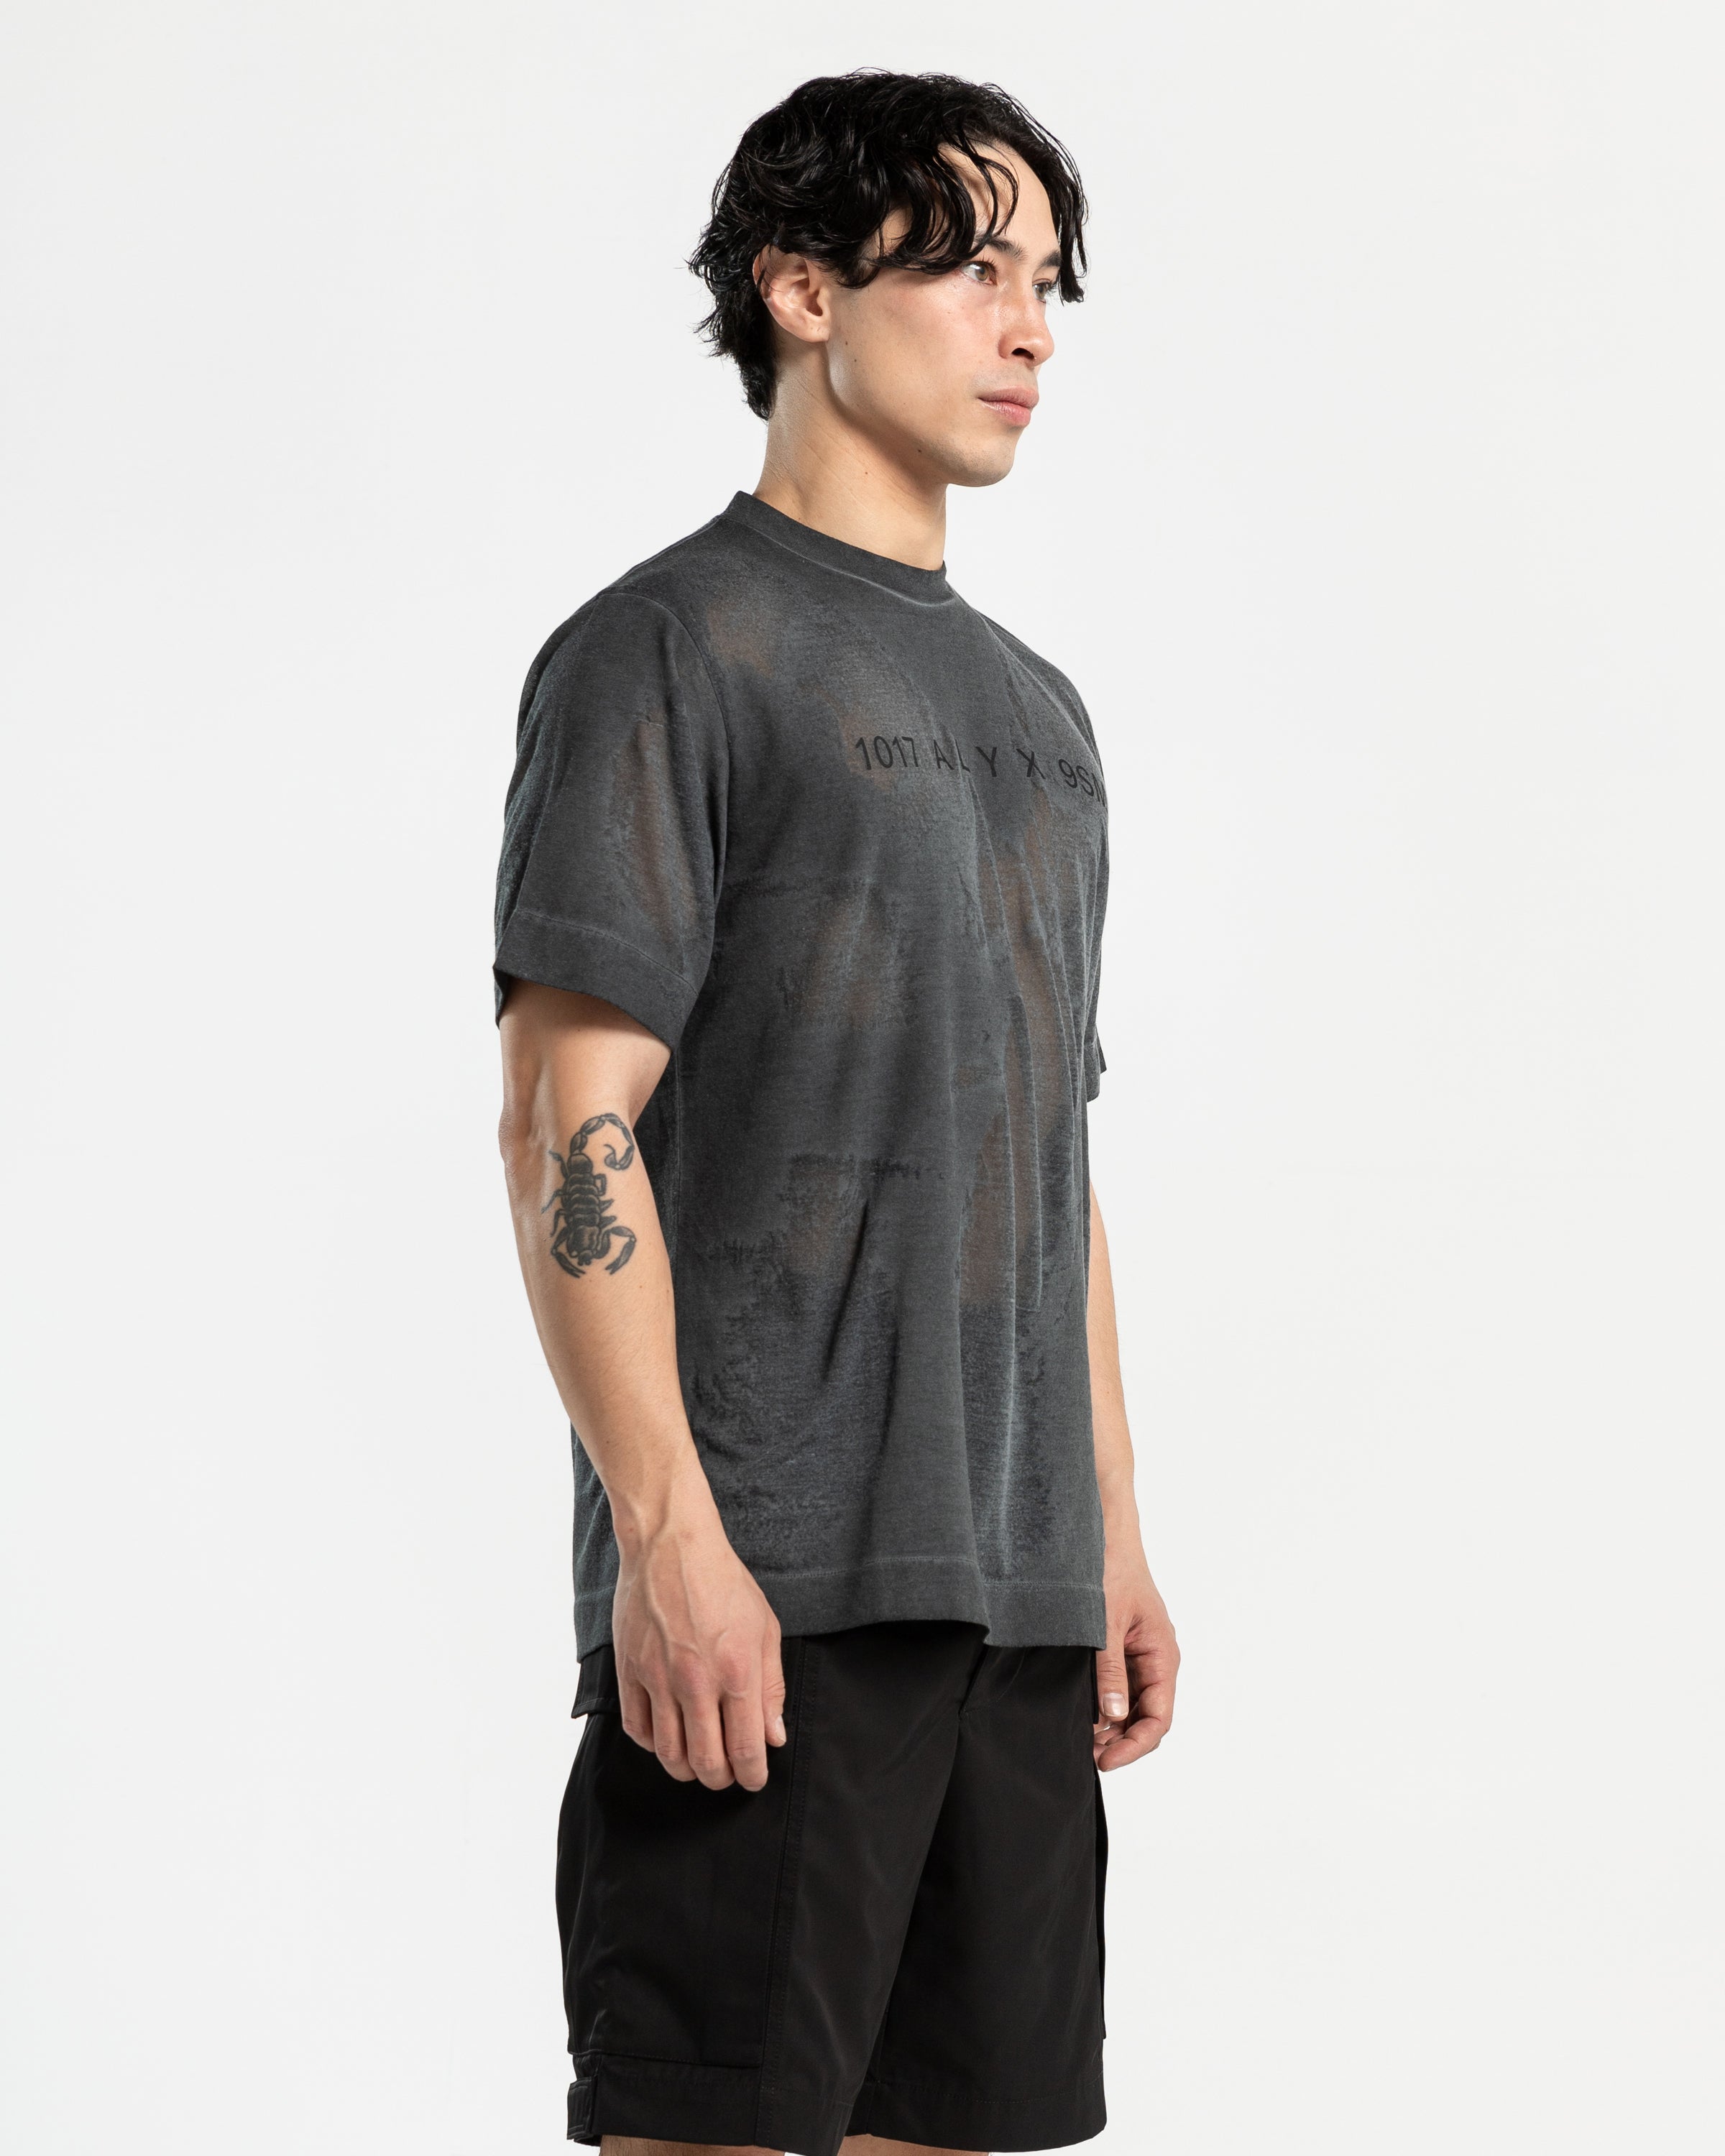 Translucent Graphic T-Shirt in Grey